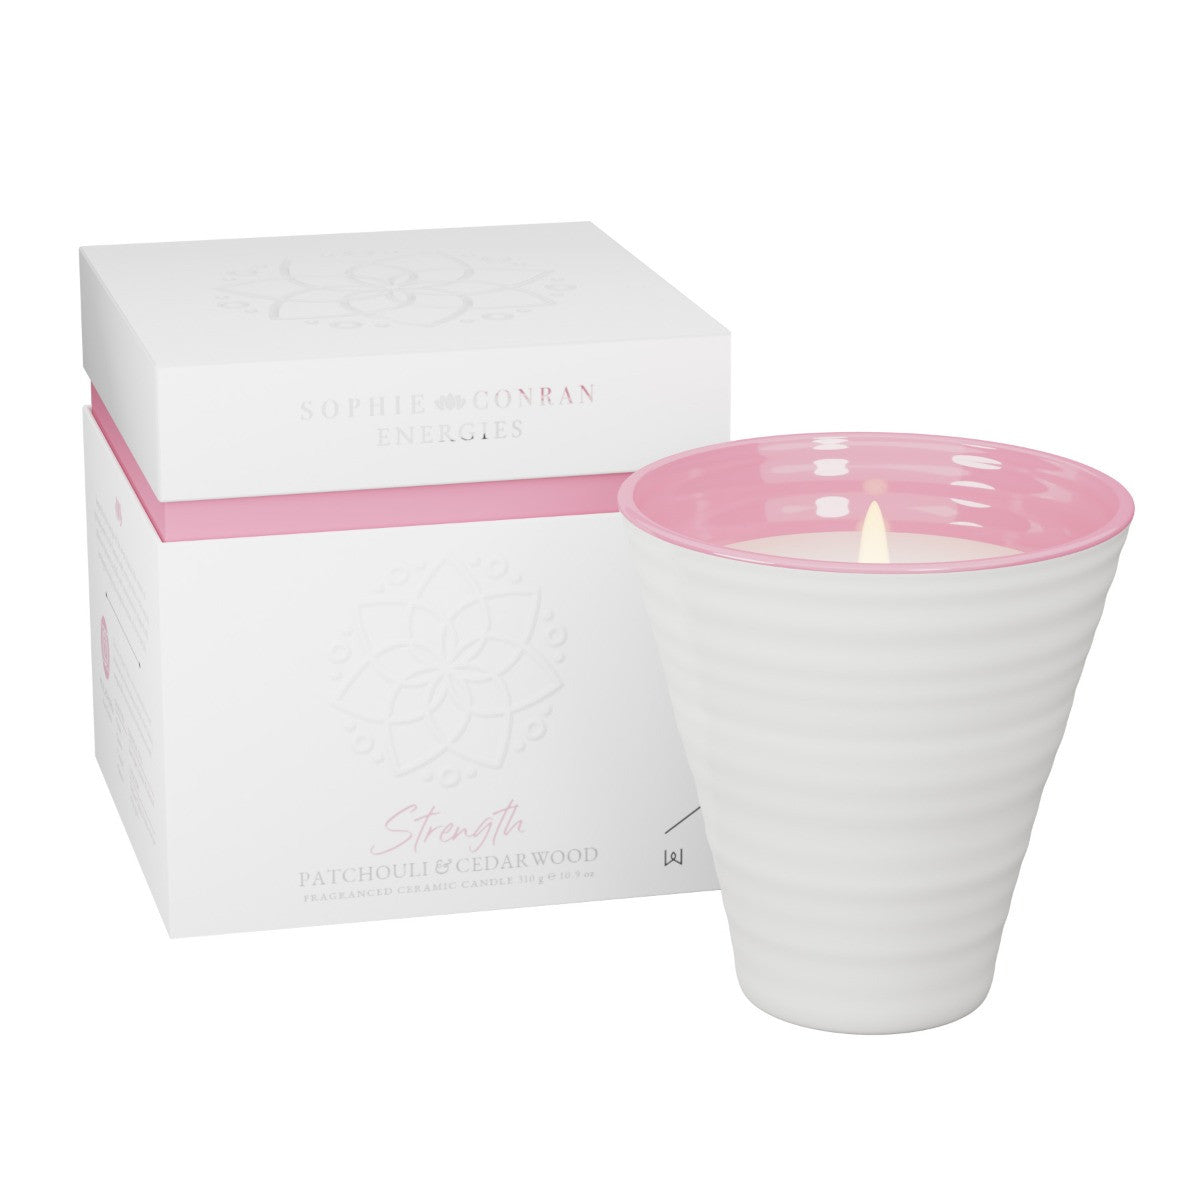 Sophie Conran Energies - Strength Candle by Wax Lyrical. Made in England.